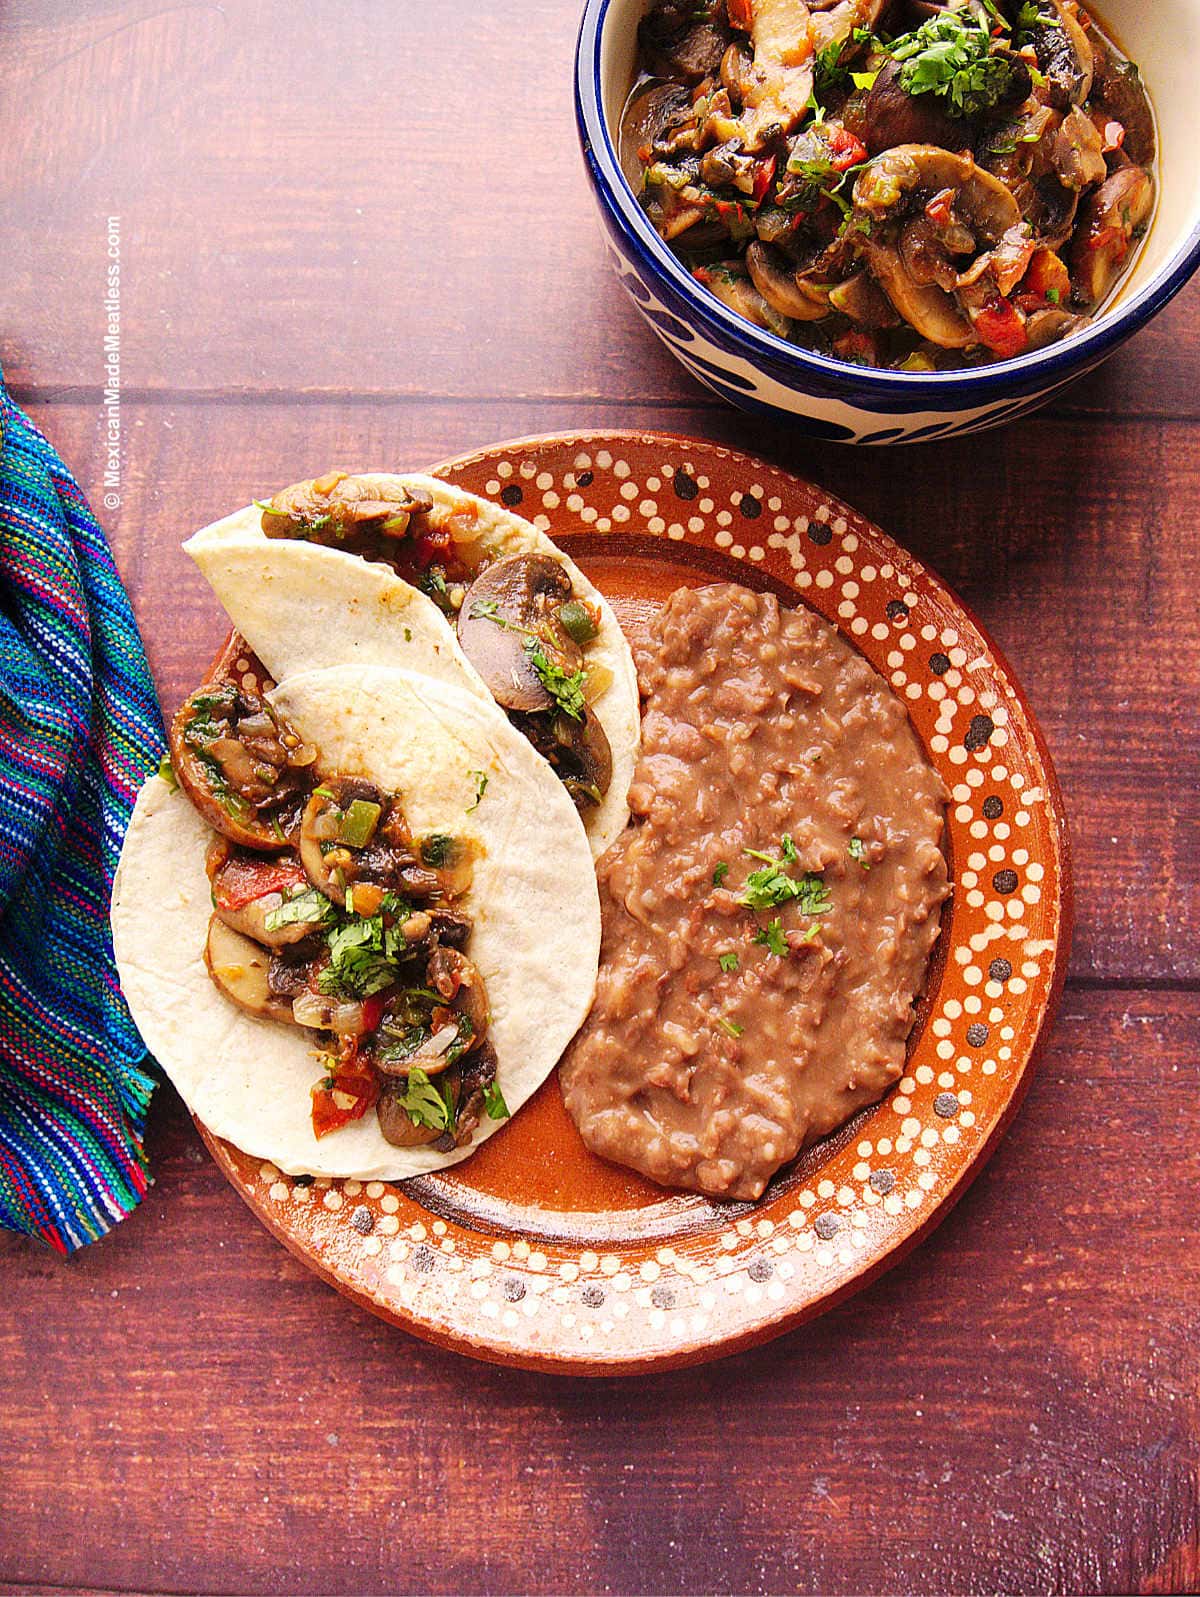 Mushroom tacos with a side of refried beans on a decorative Mexican terracotta plate.